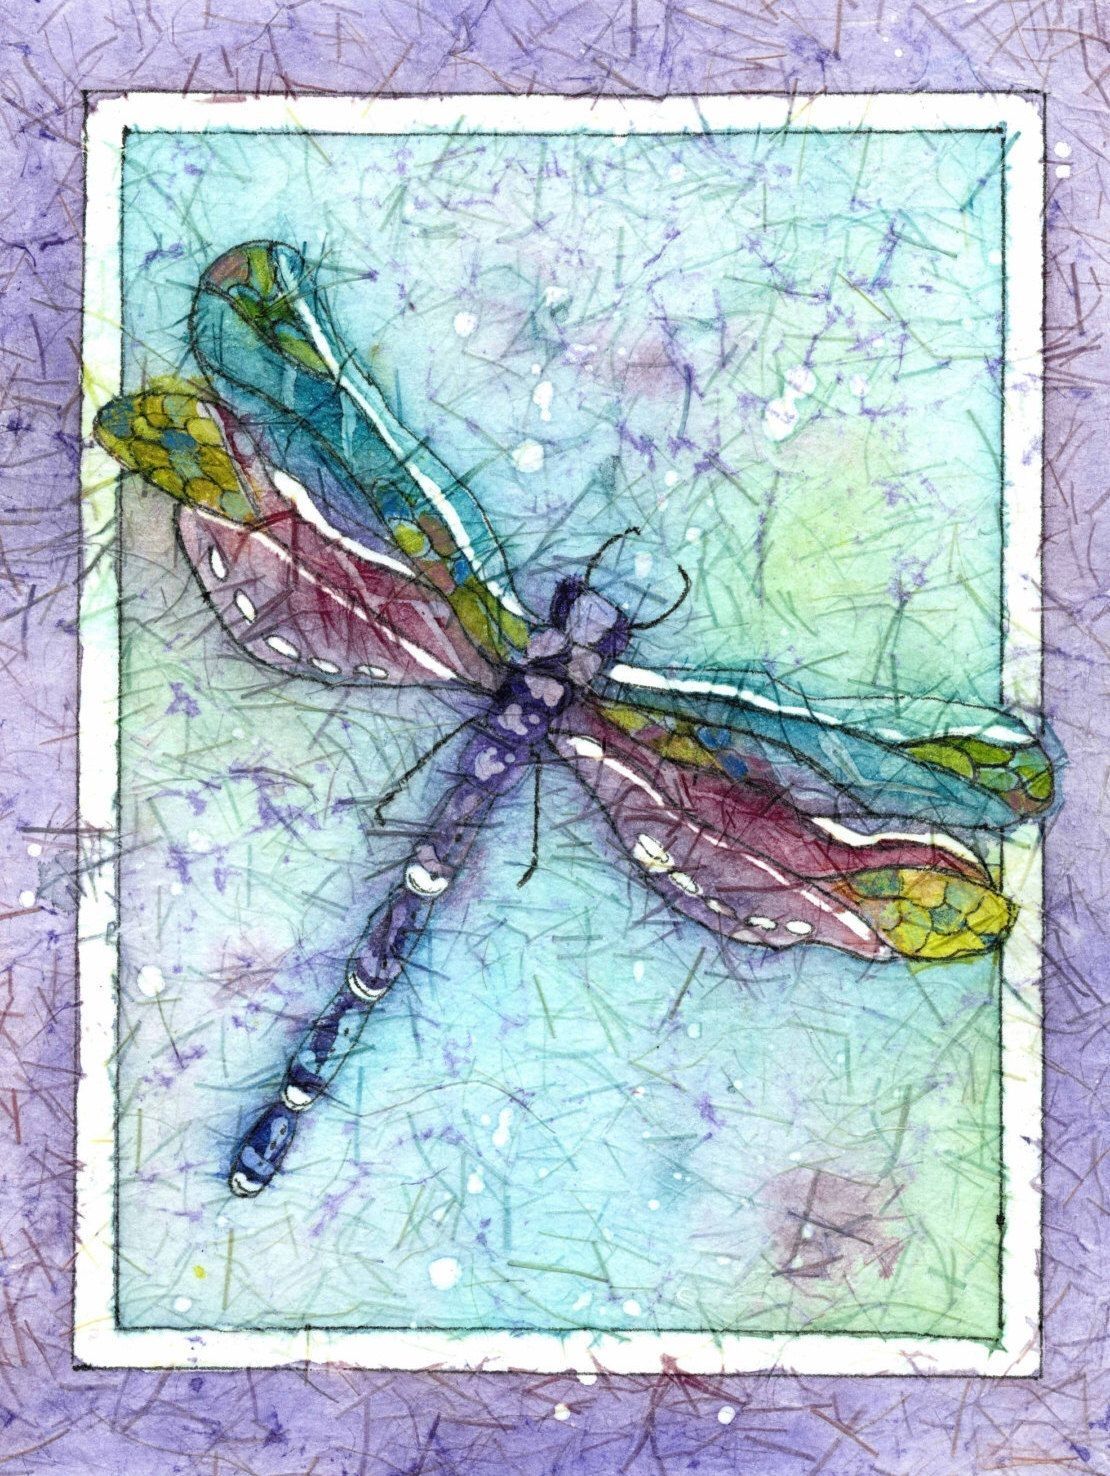 Metal Dragonfly Wall Art,dragonfly Watercolor,dragonfly Painting In Dragonfly Painting Wall Art (View 3 of 20)